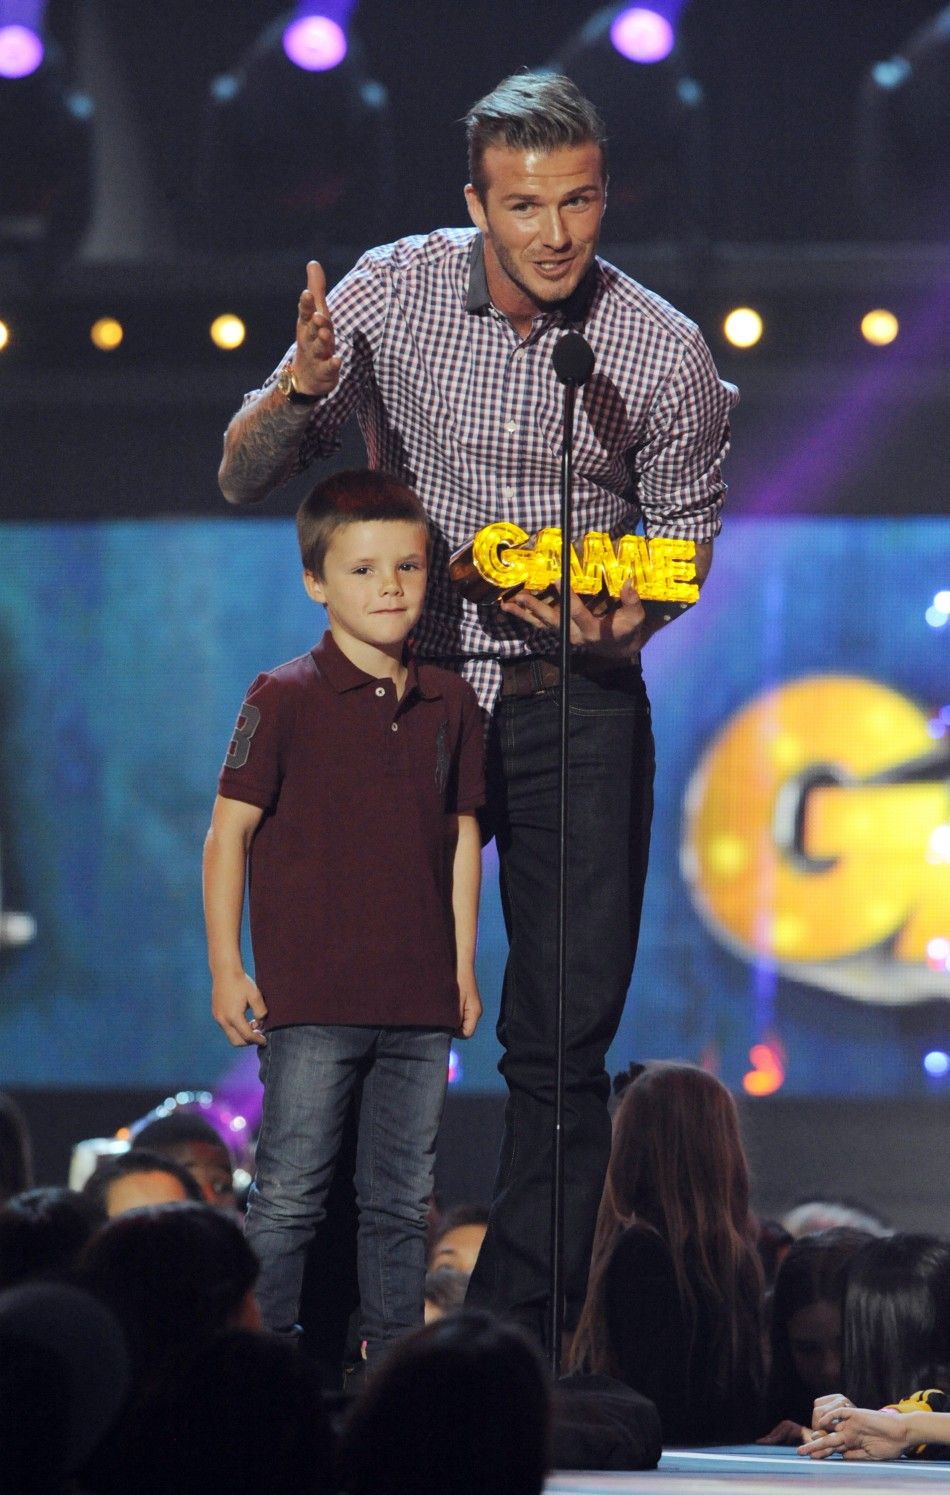 David Beckham with his son Cruz accepts the Thats How I Roll award 